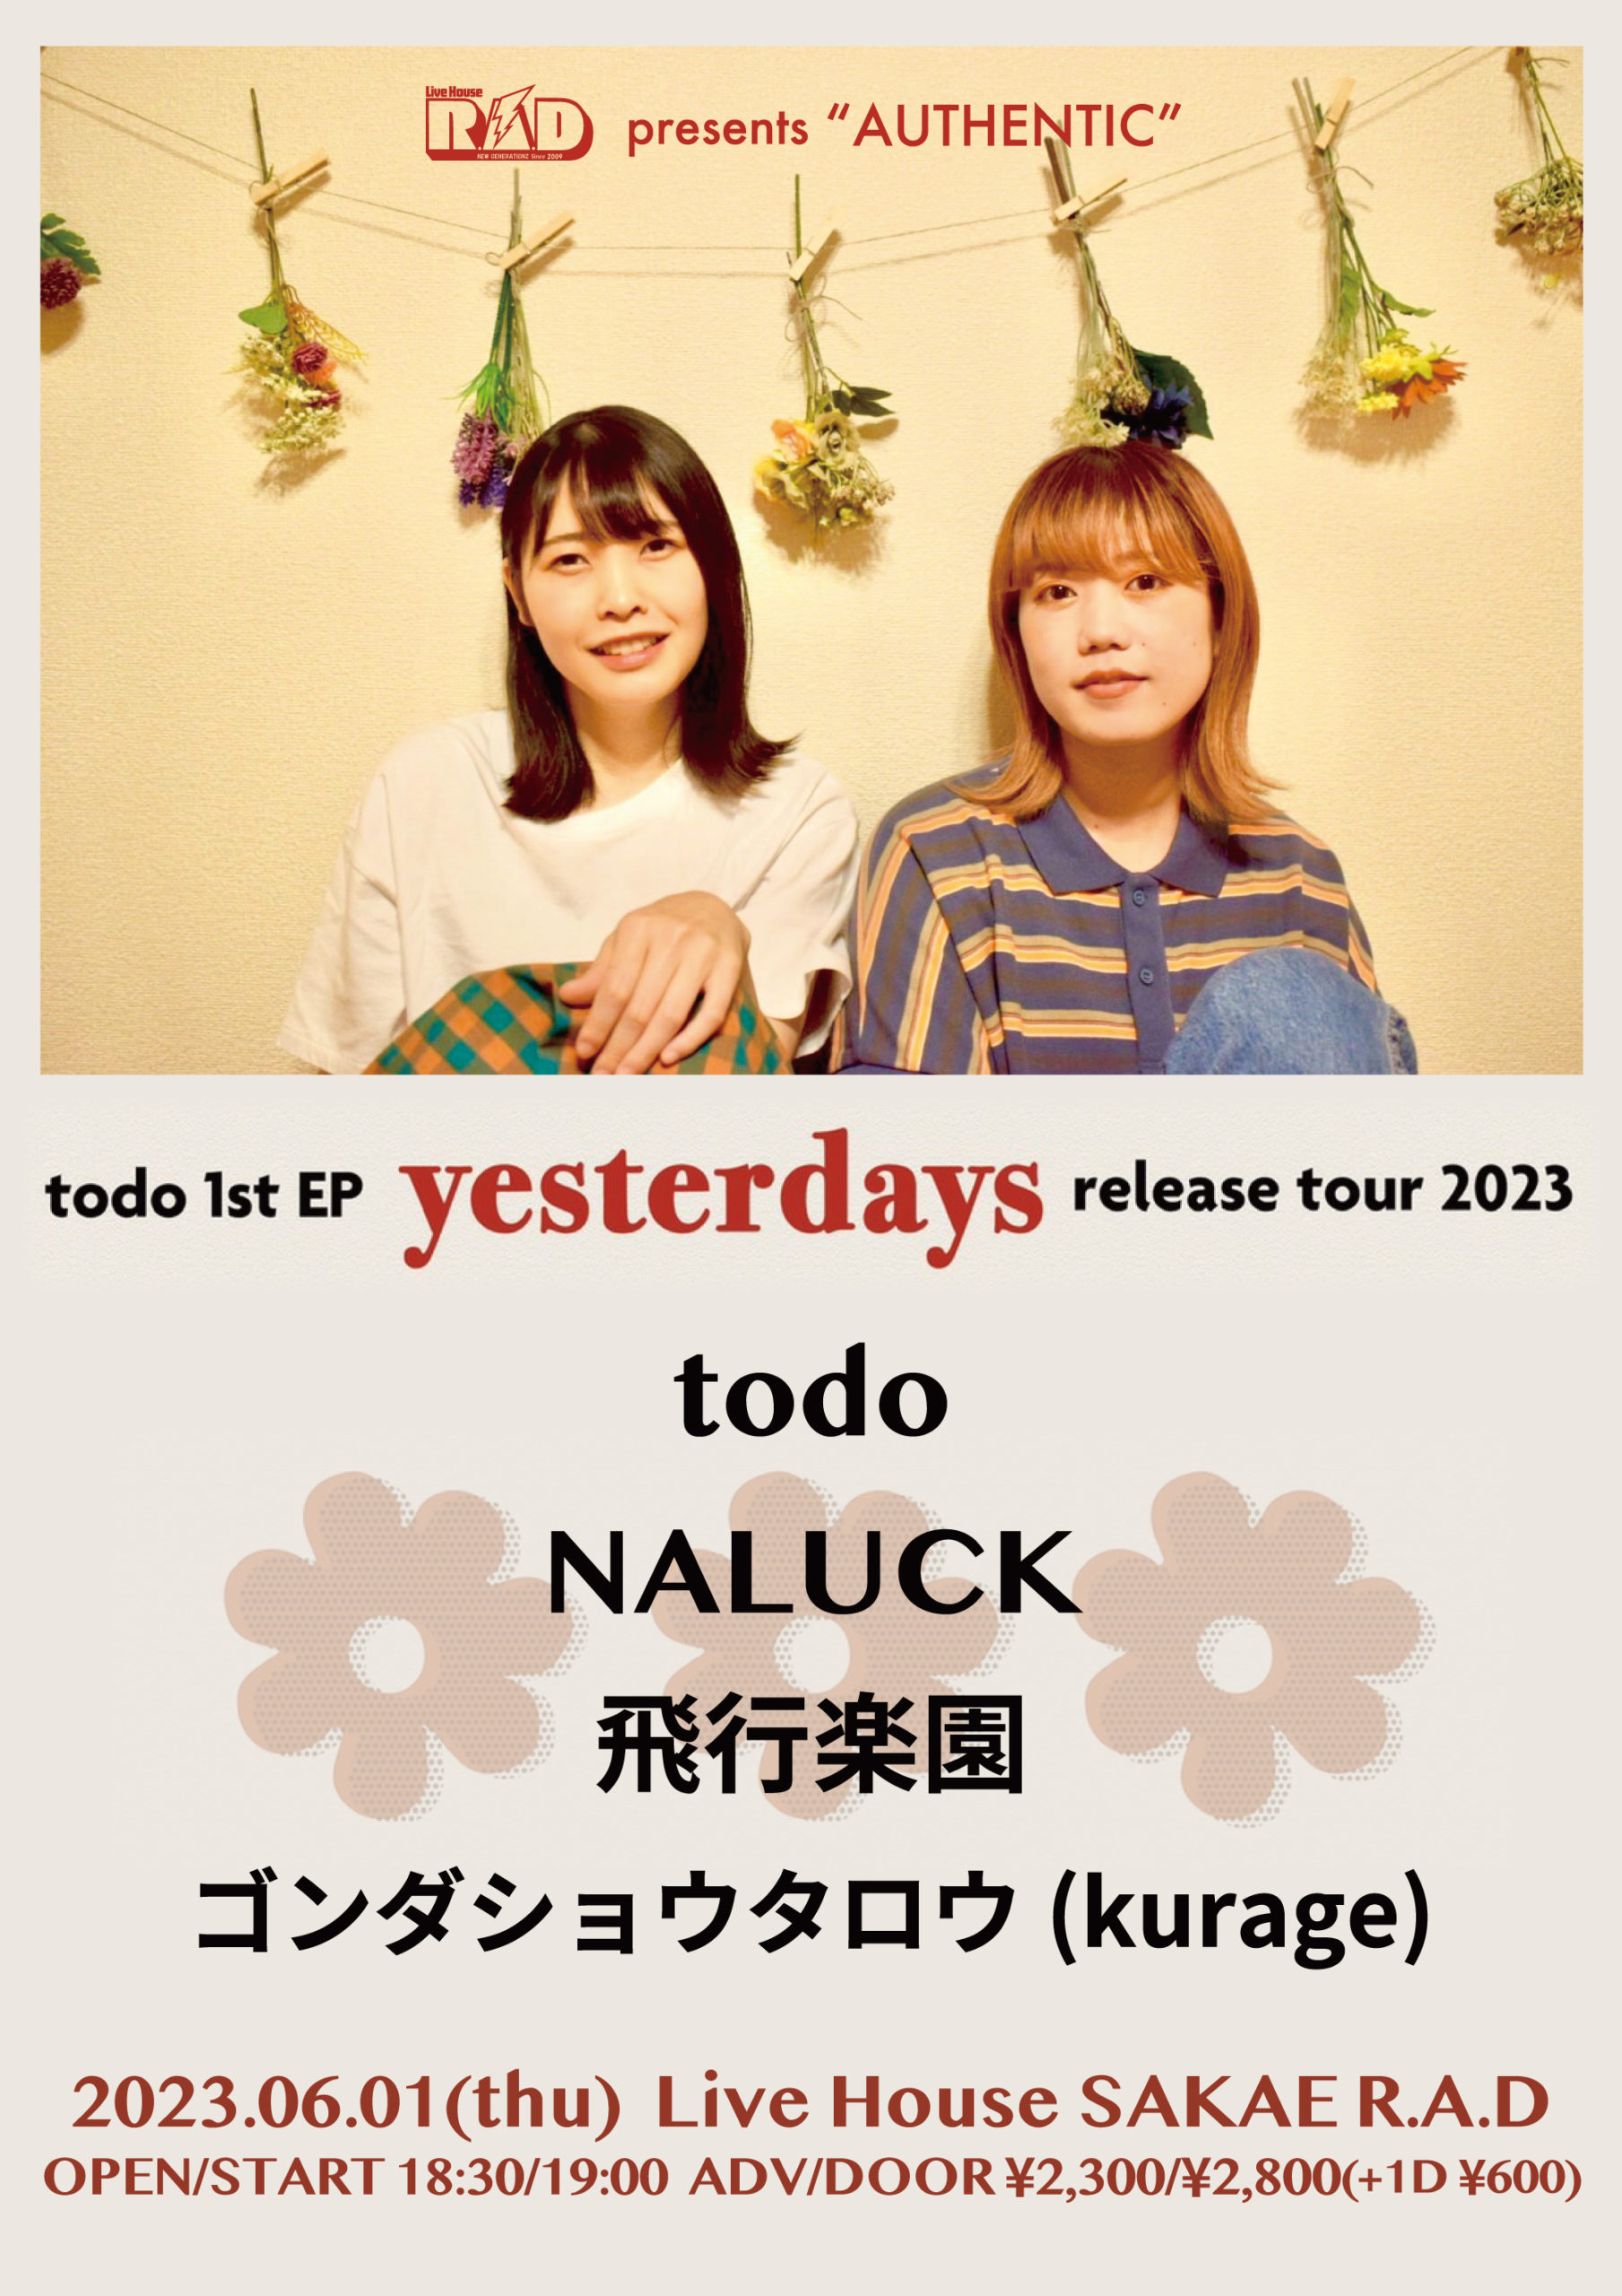 R.A.D presents "AUTHENTIC" todo 1st EP yesterdays release tour 2023